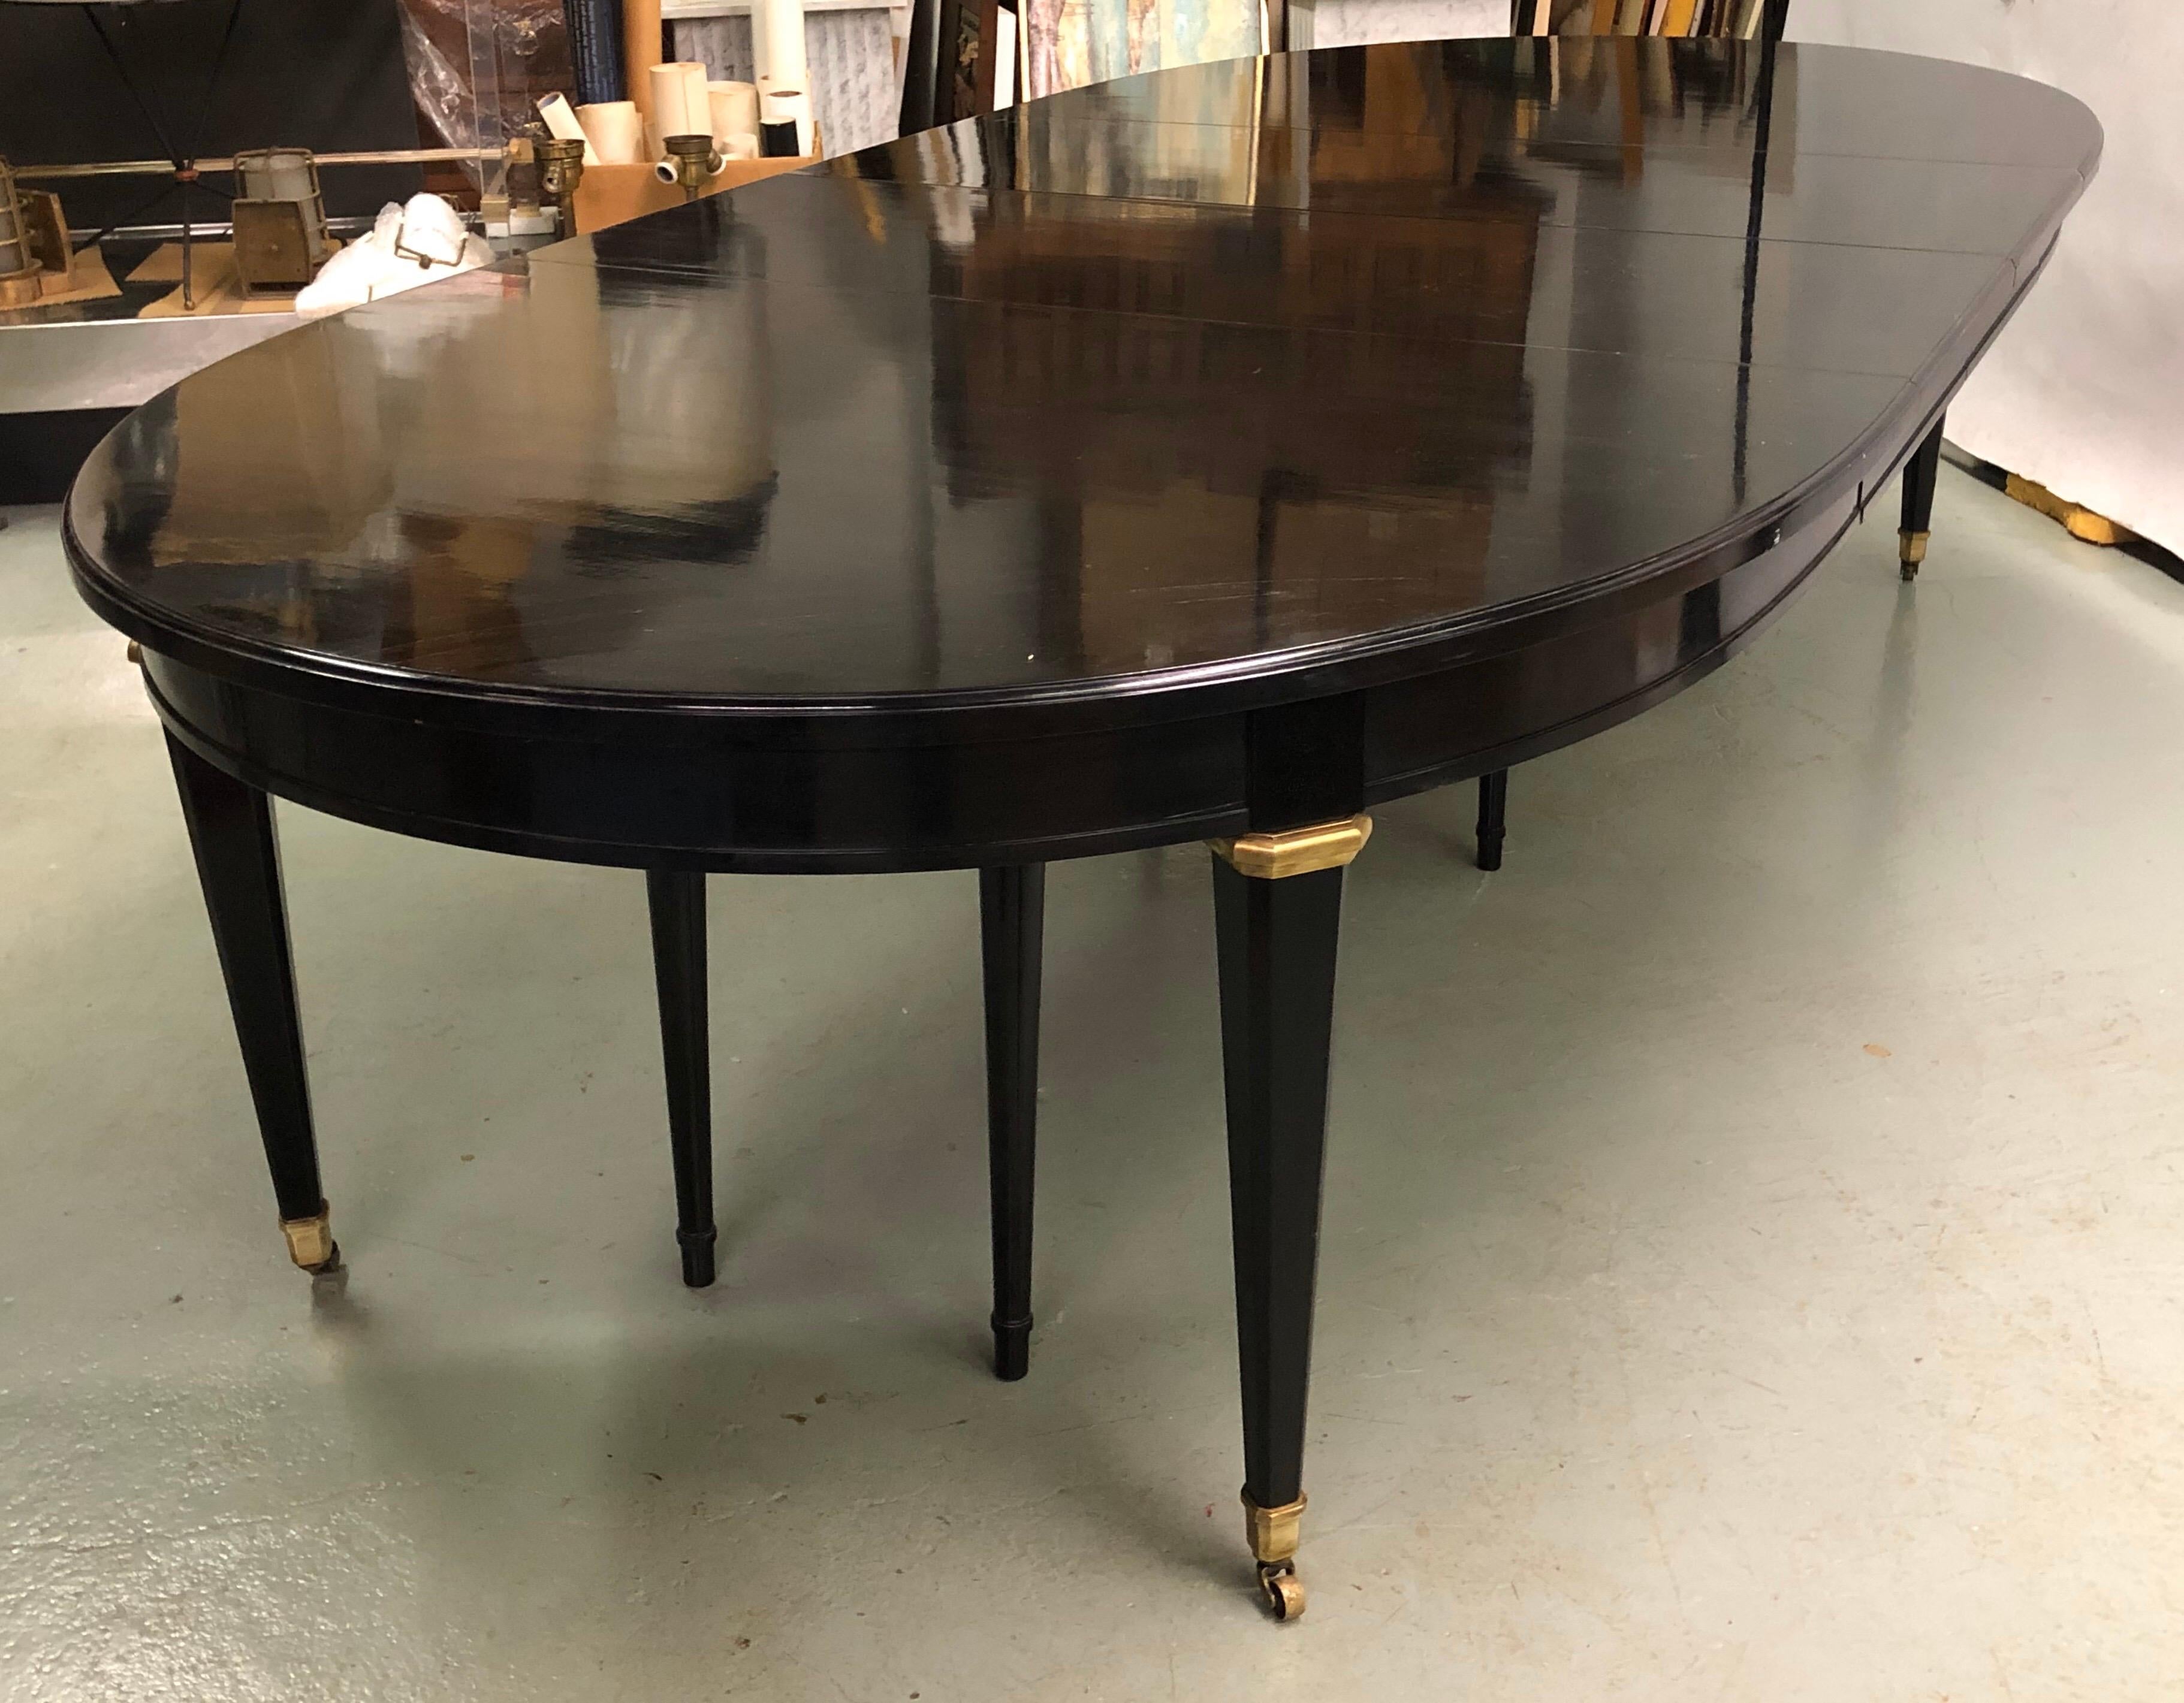 An exceptional and luxurious French ebonized mahogany dining room table in the modern neoclassical style of Louis XVI by Maison Jansen. 

The table is sober in it's design aesthetic with it's sleek, sensuous oval form. It features a 118